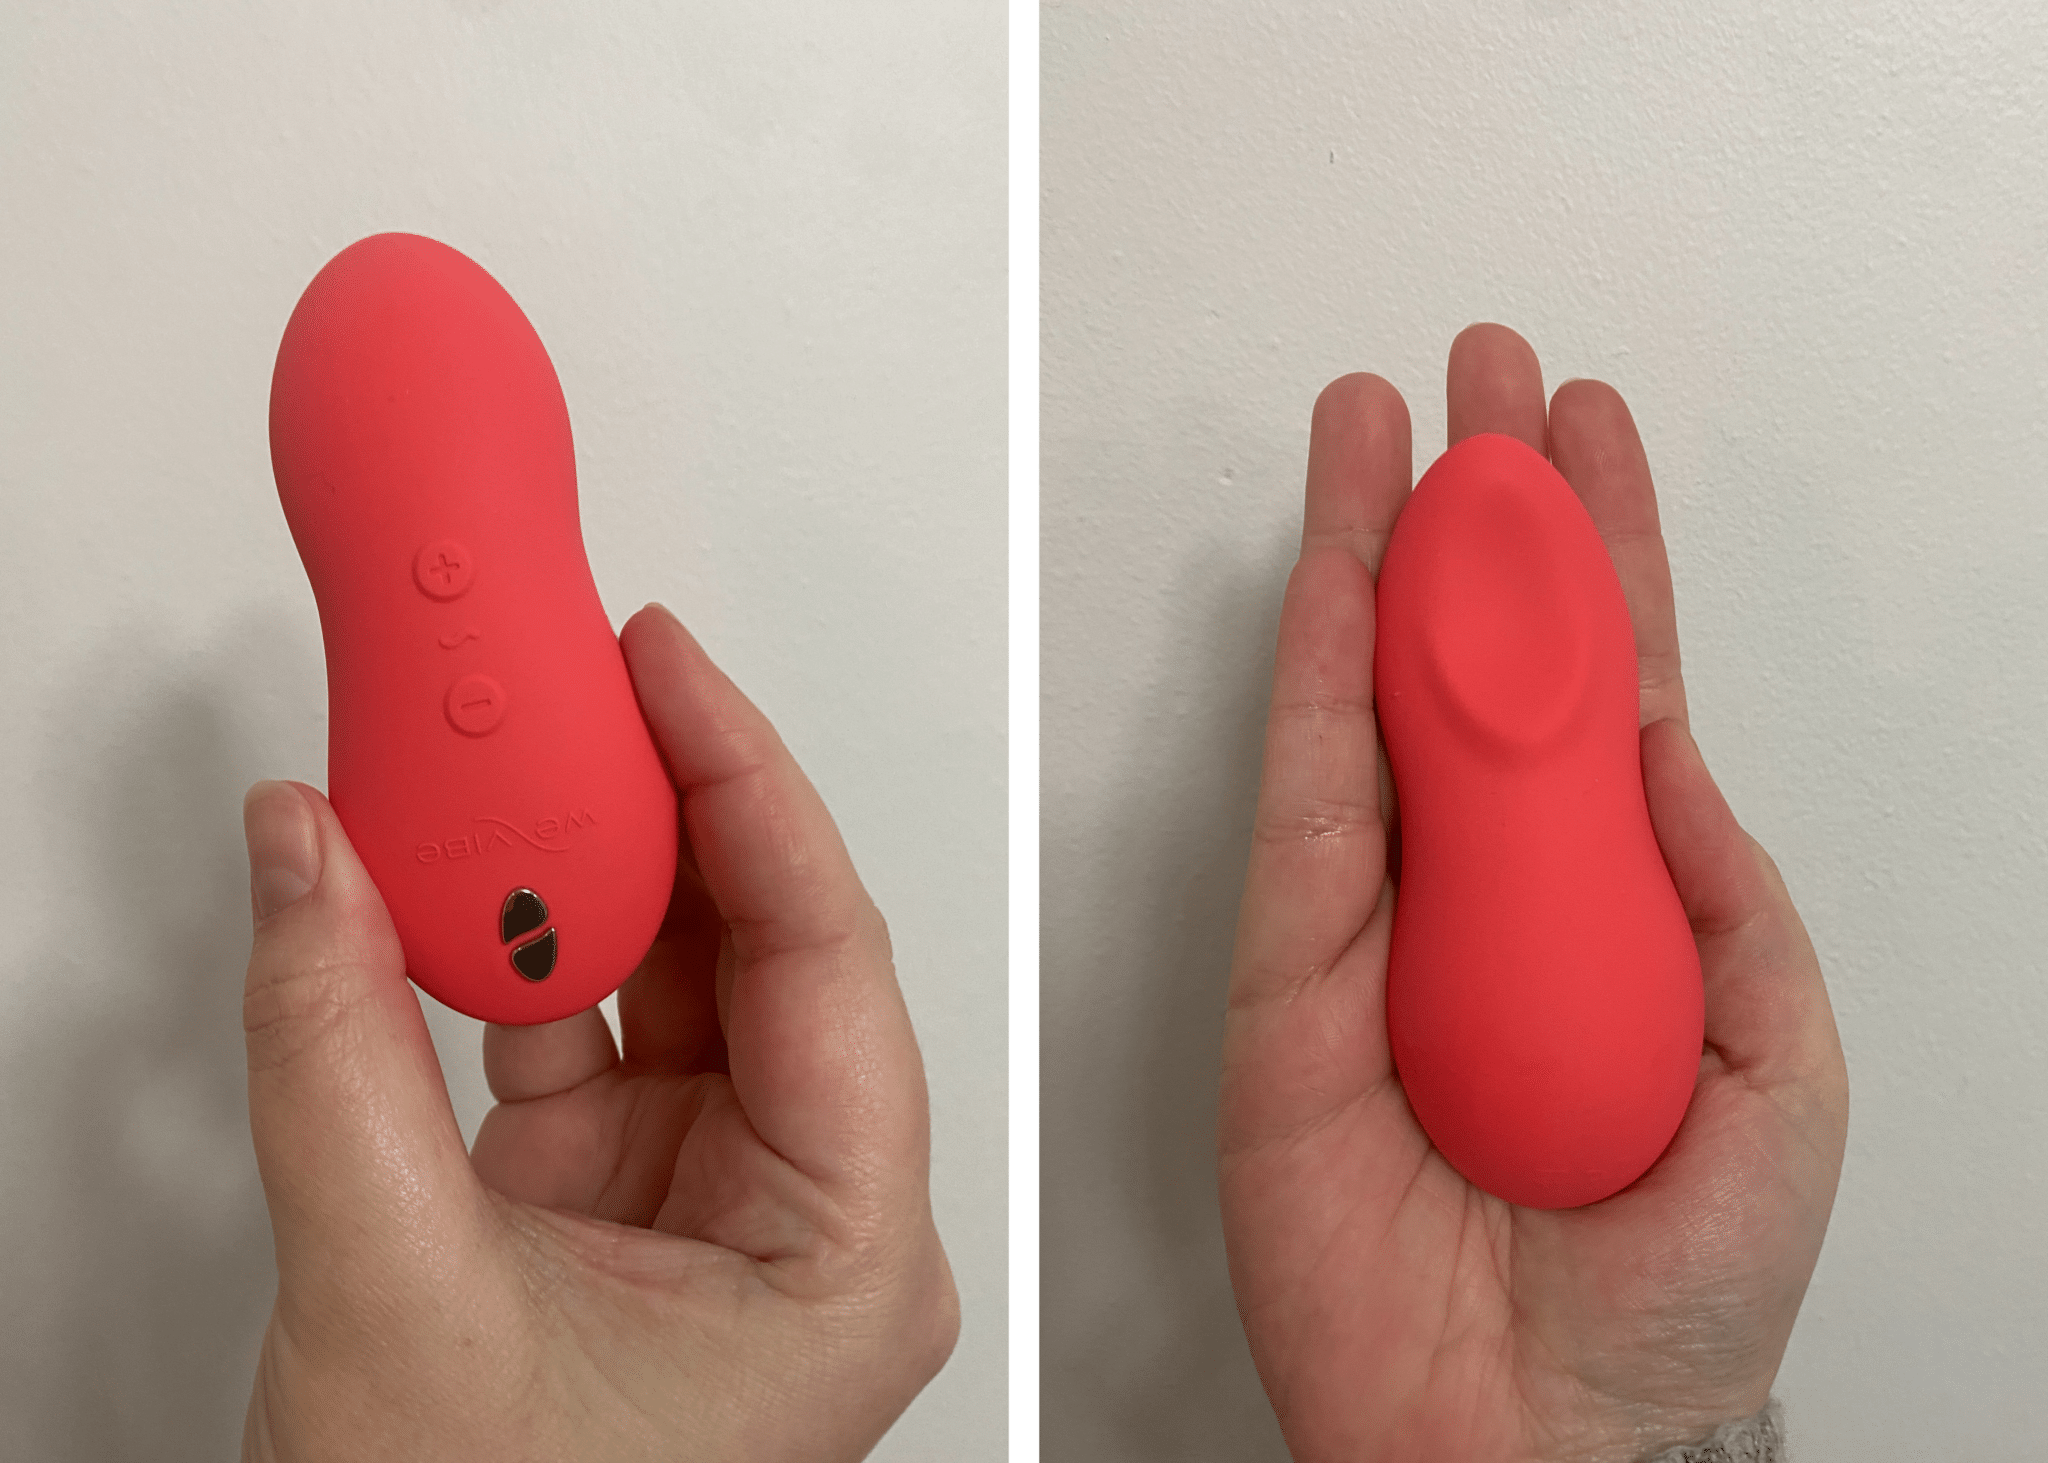 We-Vibe Touch X Rating the We-Vibe Touch X’s design